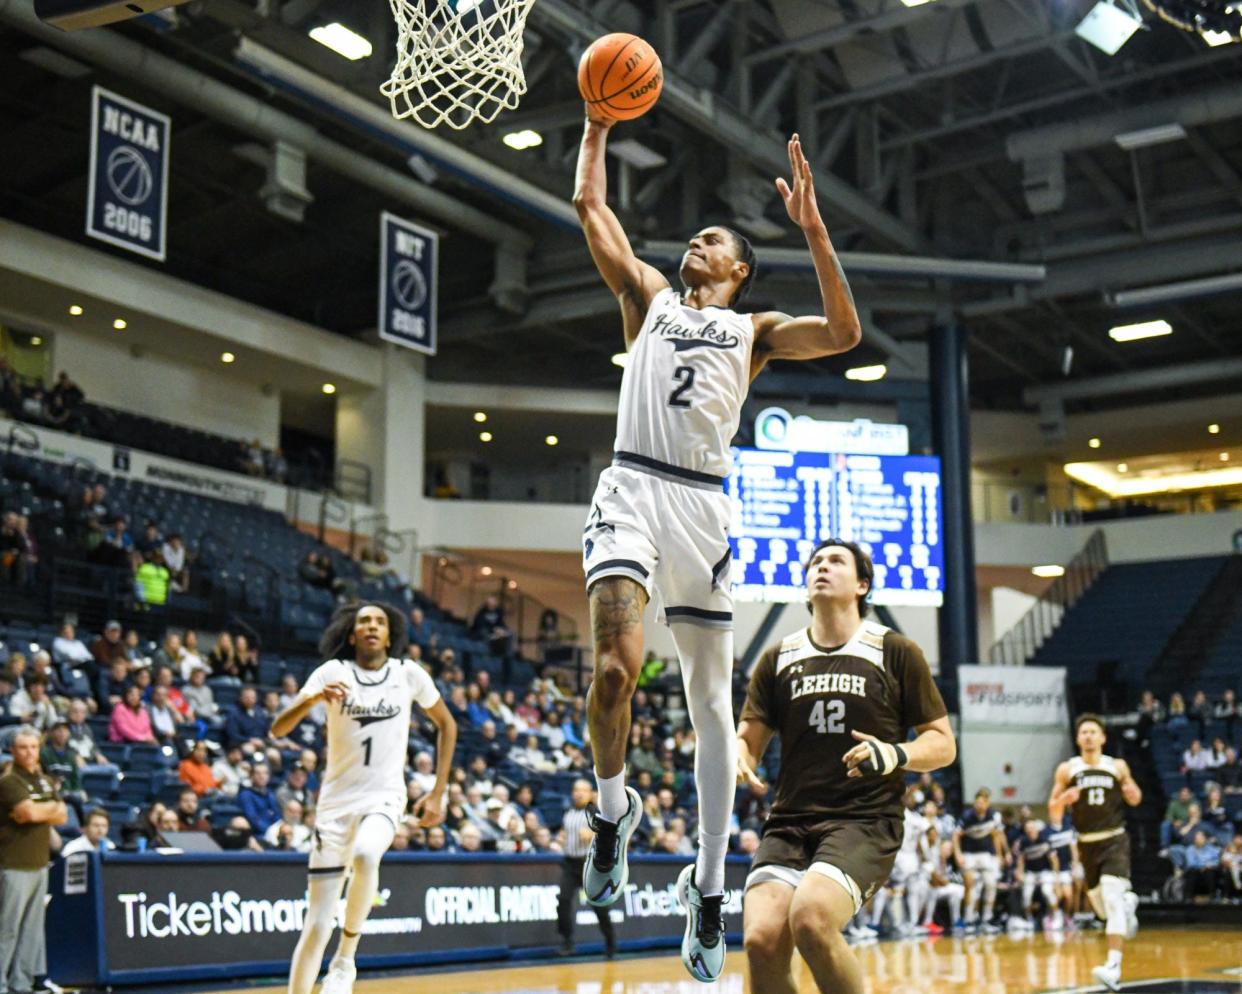 Monmouth's Jaret Valencia goes up for a dunk against Lehigh on Nov. 21, 2023 in West Long Branch, N.J.
(Credit: Monmouth Athletics)